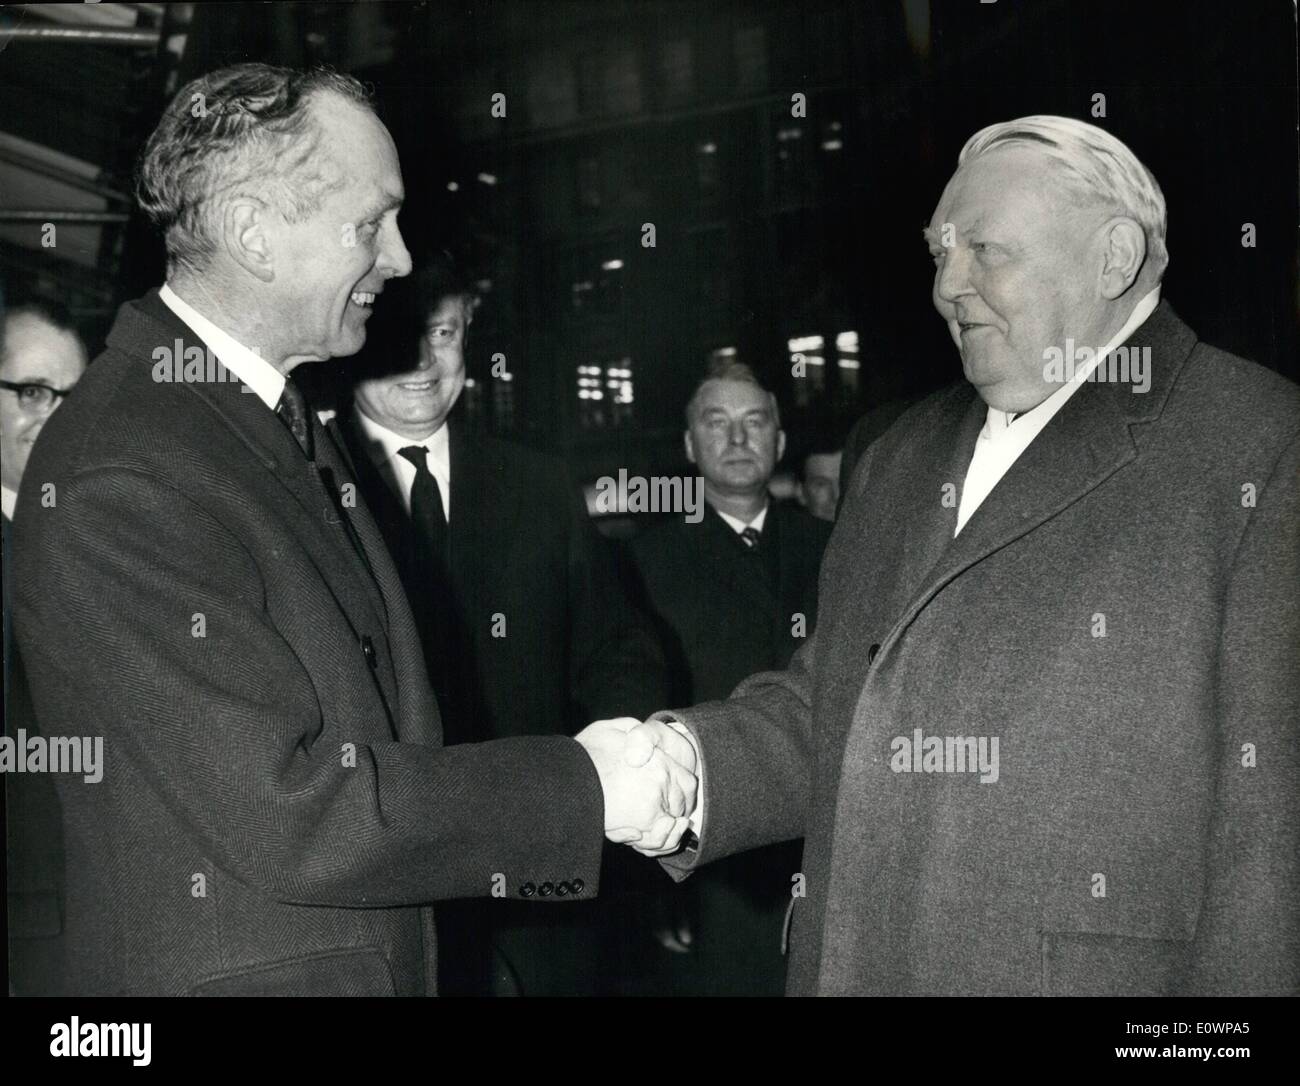 Jan. 01, 1964 - Sir Alec greets Dr. Erhard. The West German Chancellor Dr. Ludwig Erhard arrived in London today for a two-day visit. After his arrival at Gatwick Airport, he was greeted at Victoria Station by Prime Minister Sir Alec Douglas-Home. Photo Shows: Sir Alec Douglas-Home greets Dr. Erhard at Victoria this morning. Keystone Stock Photo